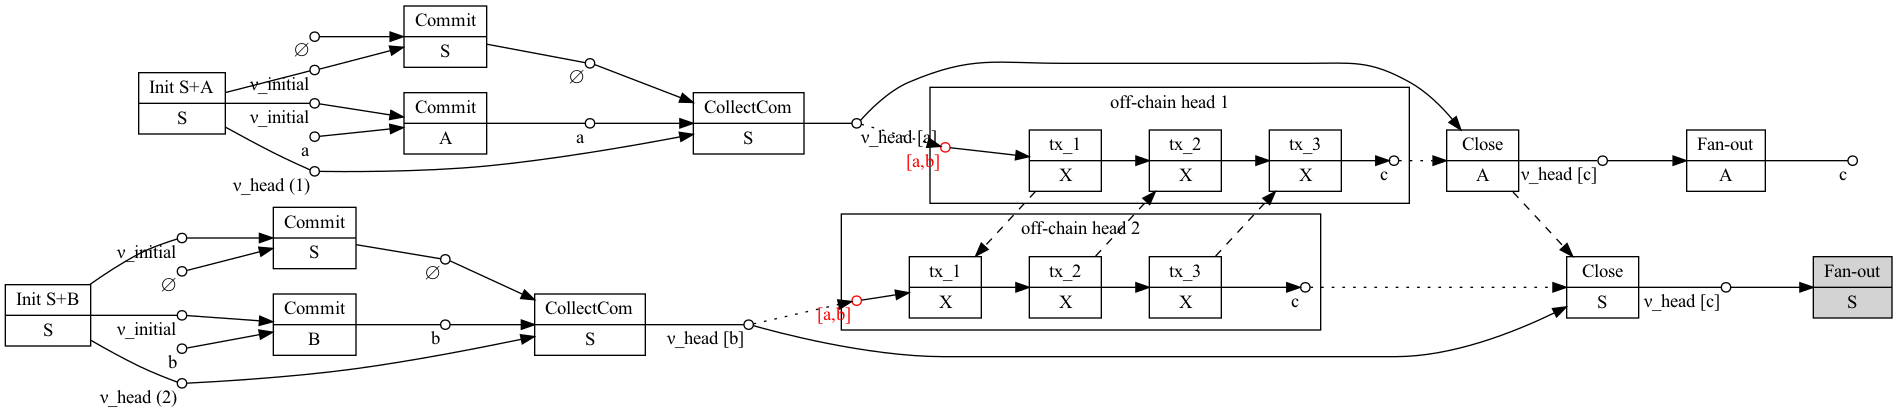 Star-shaped Network On-Chain